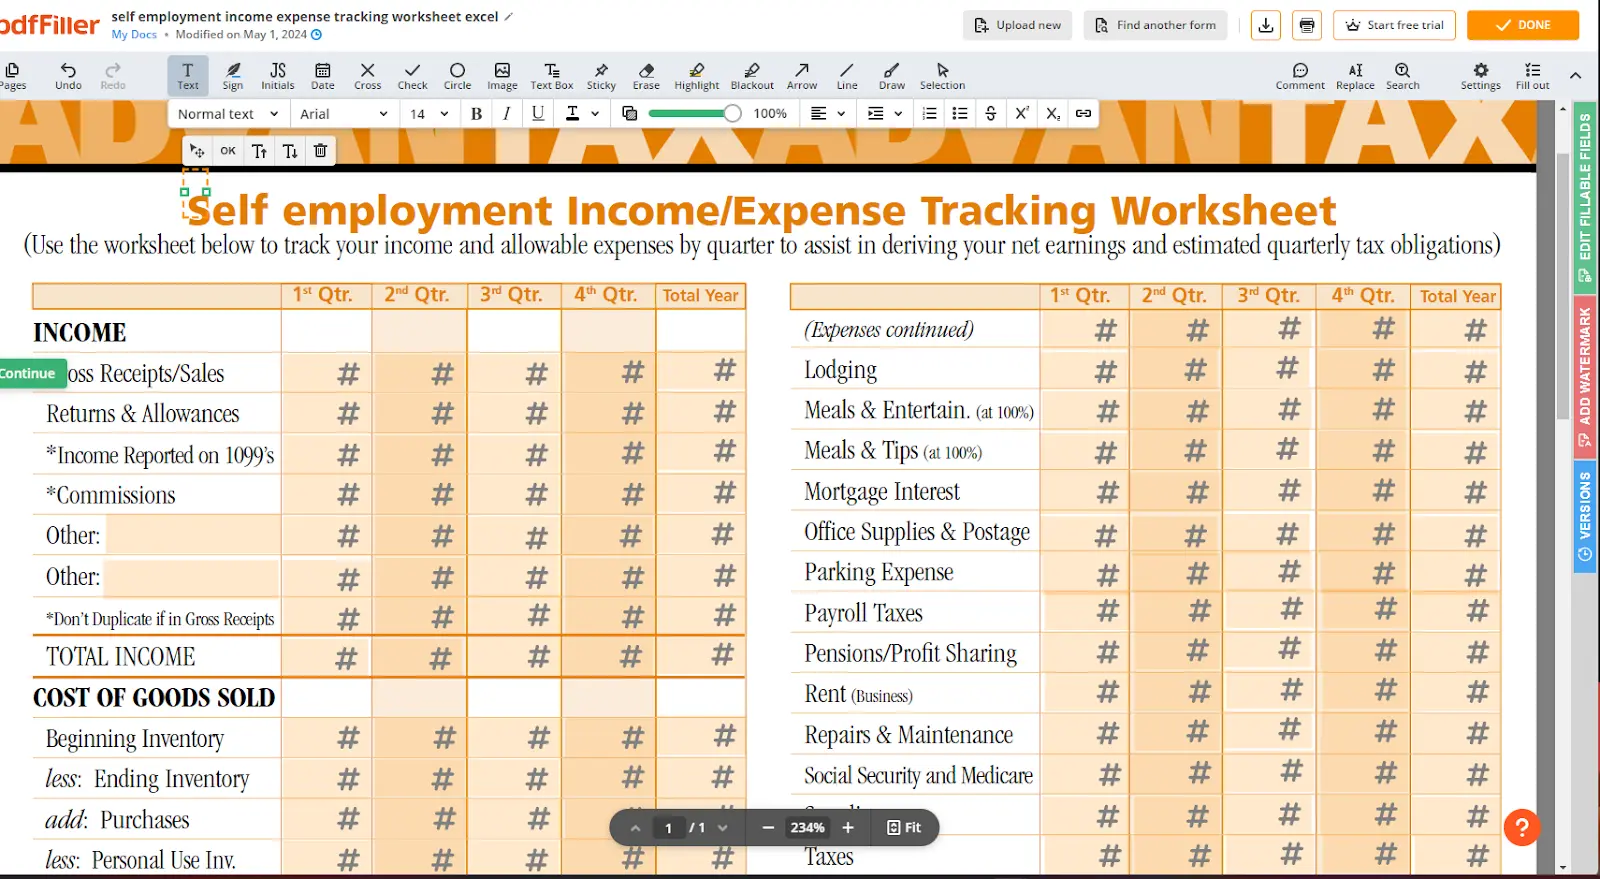 Self-employment income/expense tracking worksheet